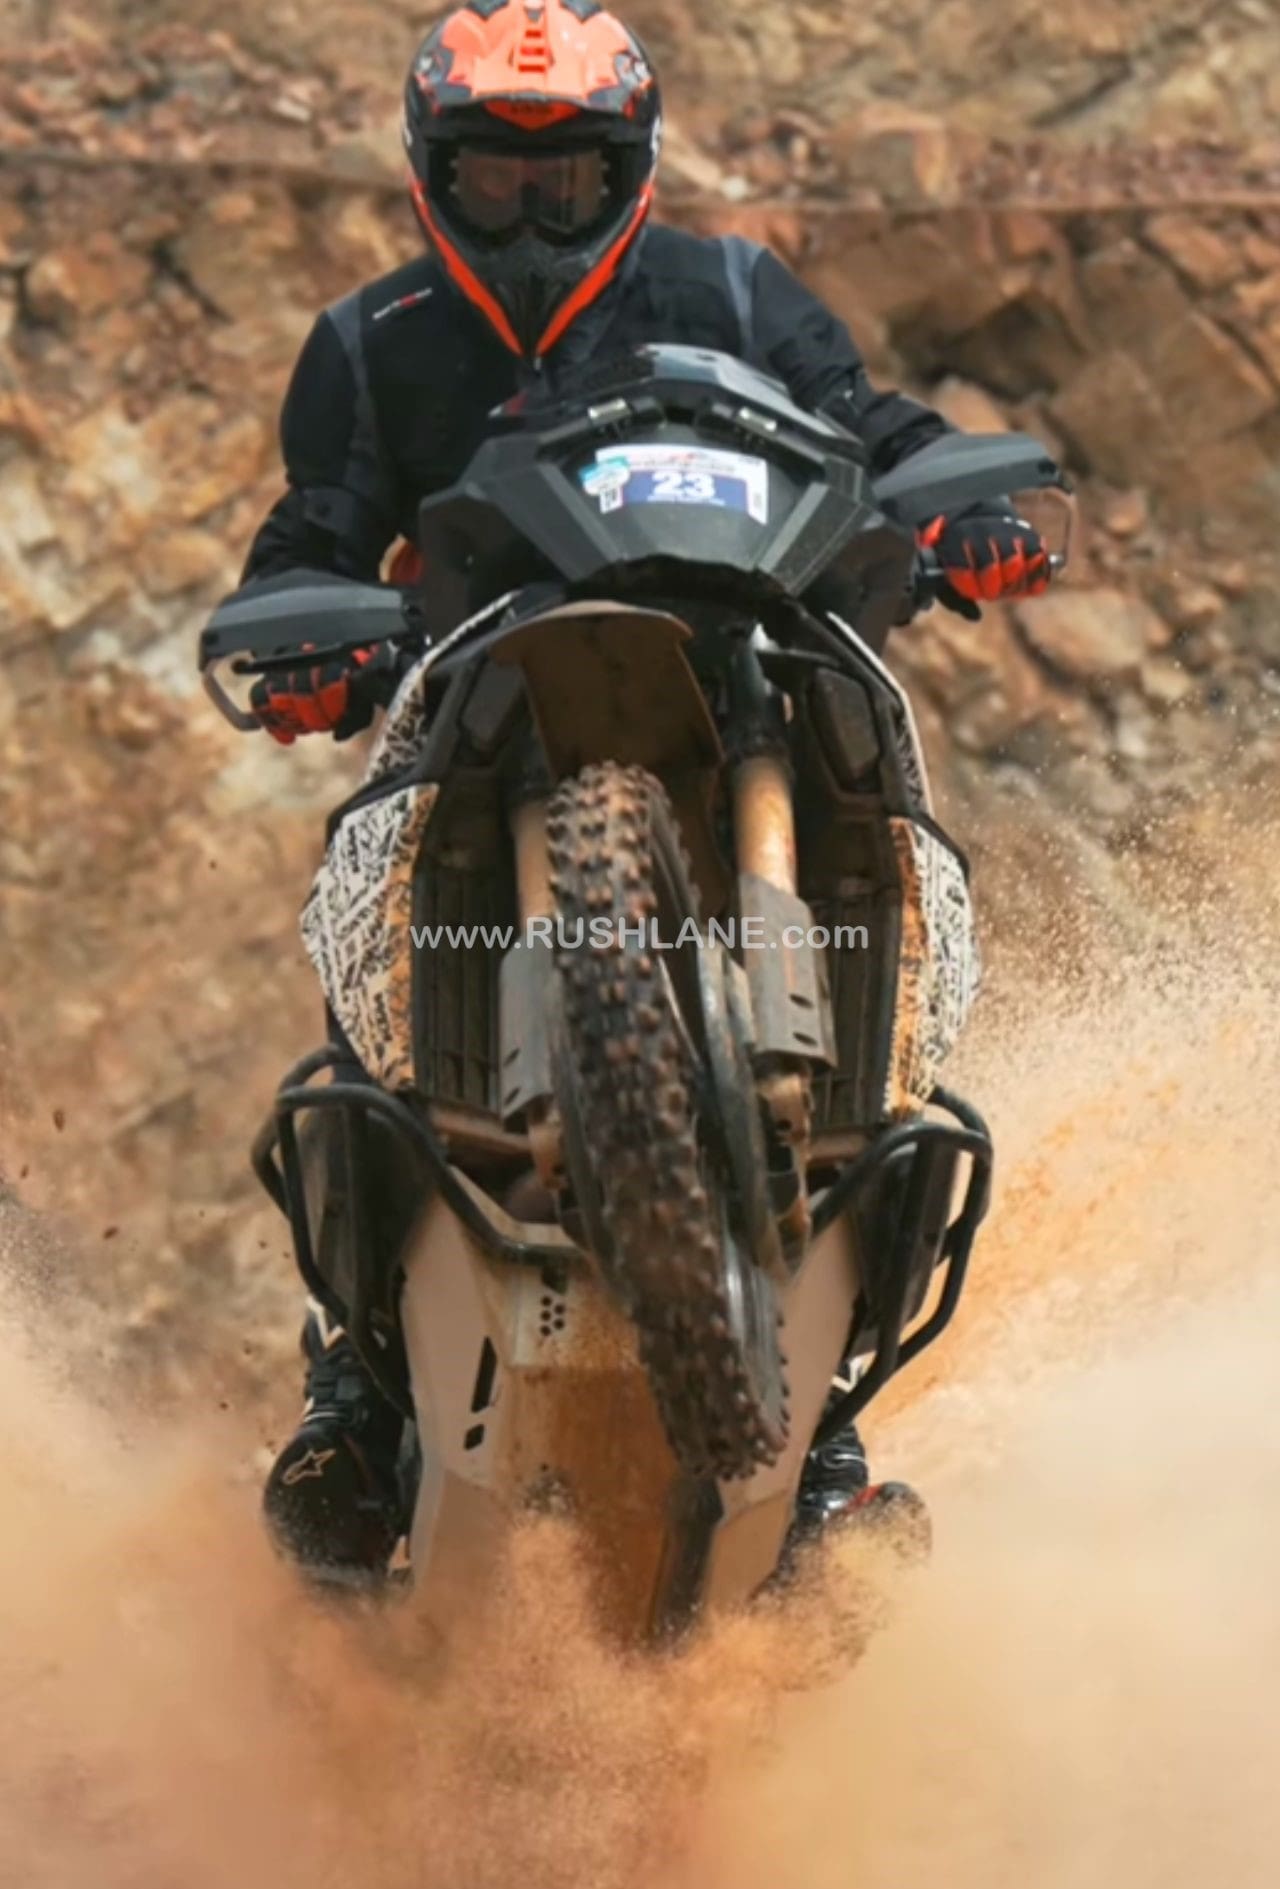 Upcoming KTM ADV Motorcycle With AMT Gearbox